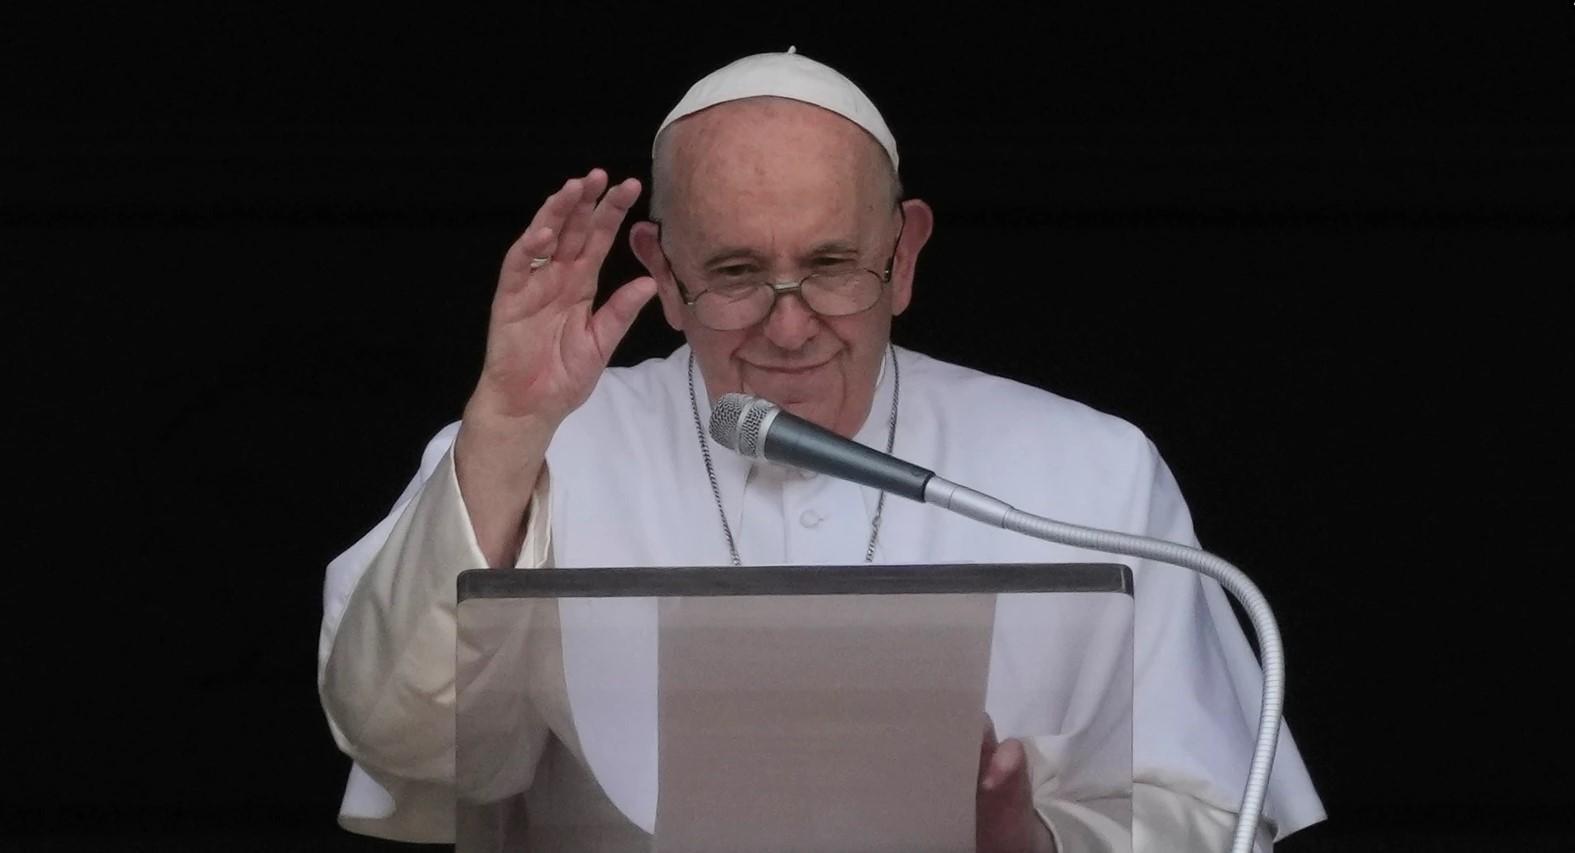 Pope Francis called the threat of the use of nuclear weapons in Ukraine obvious